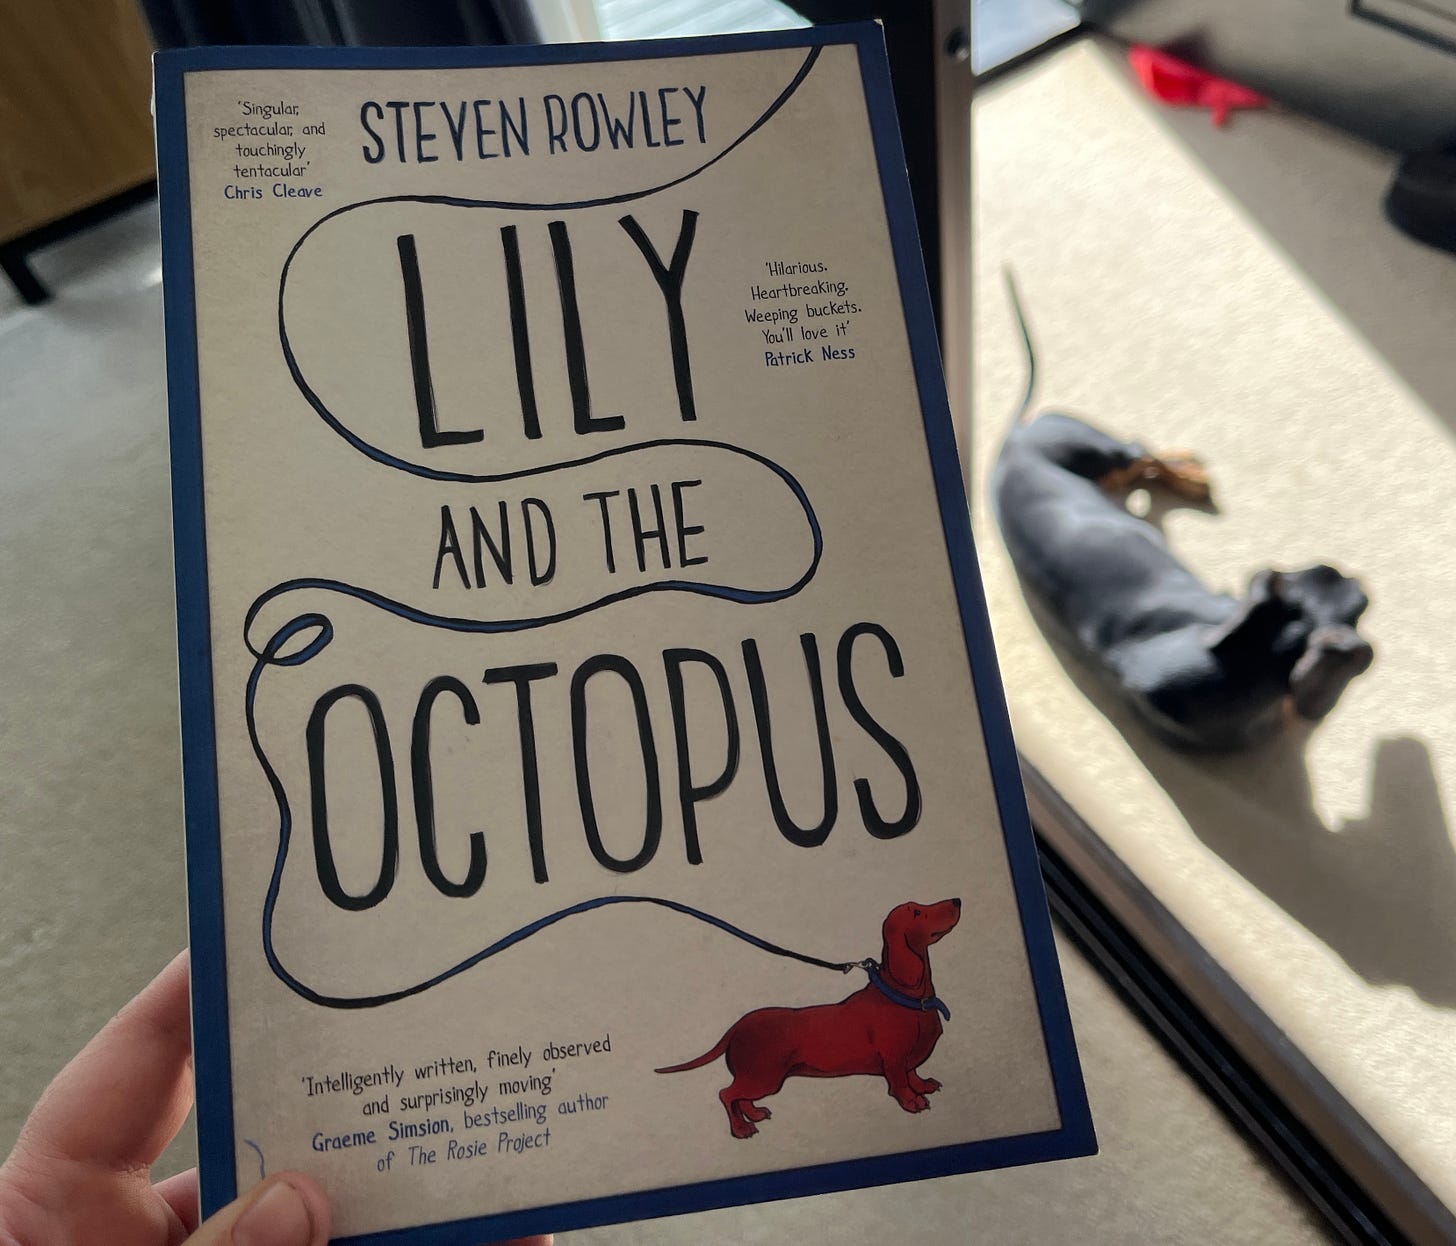 a hand holds a book titled Lily and the Octopus by Steven Rowley, with a dachshund on the cover. In the background lies a blurry black dachshund